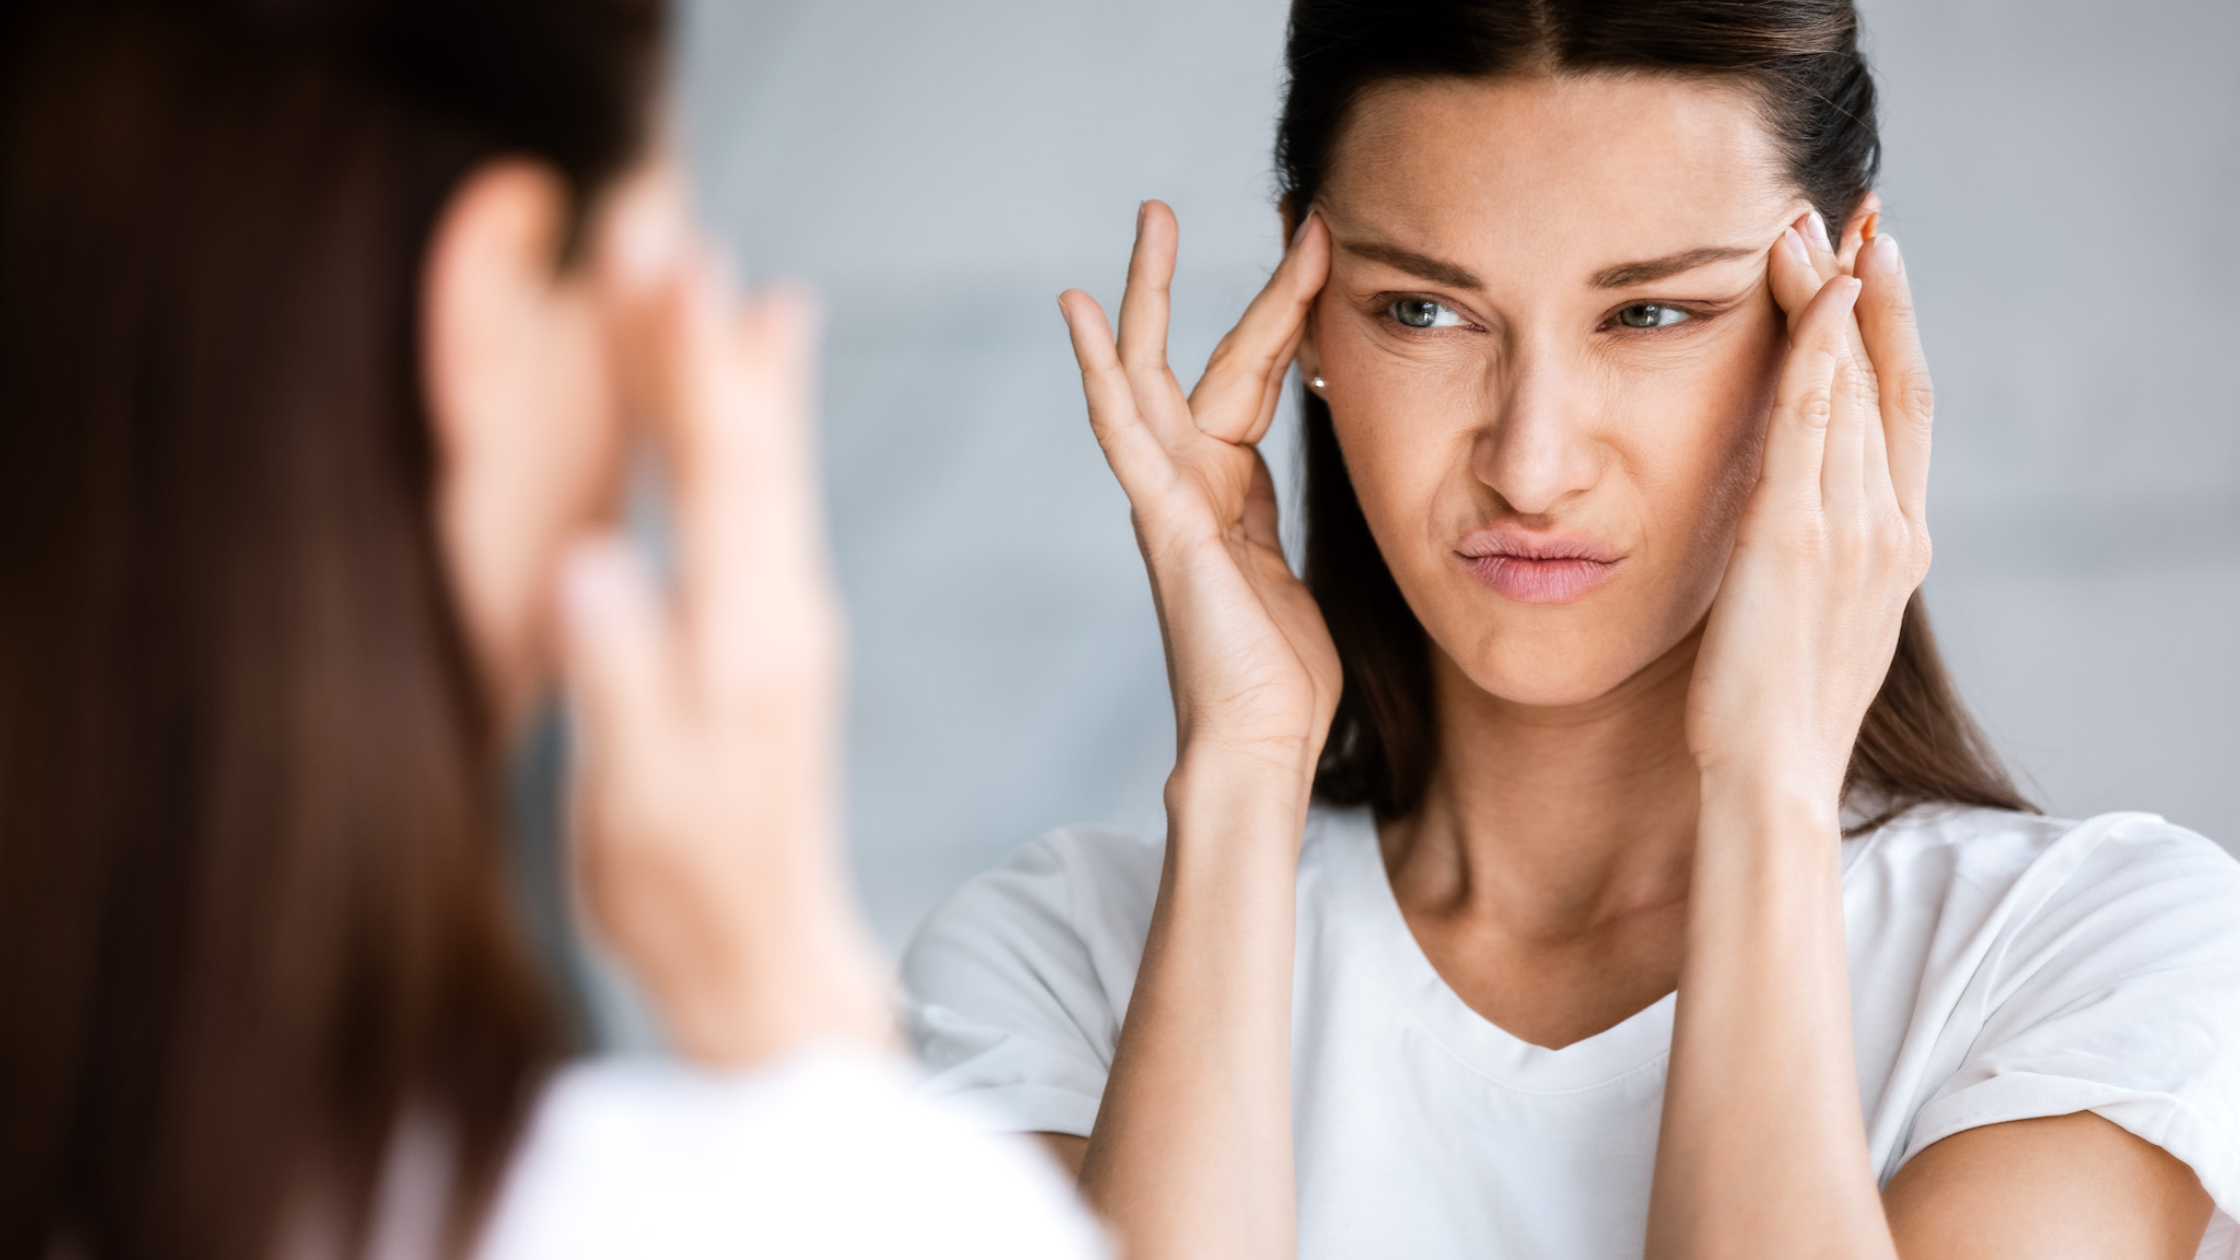 Woman looking into a mirror with her fingers on her temples because of the negative thoughts in her mind.